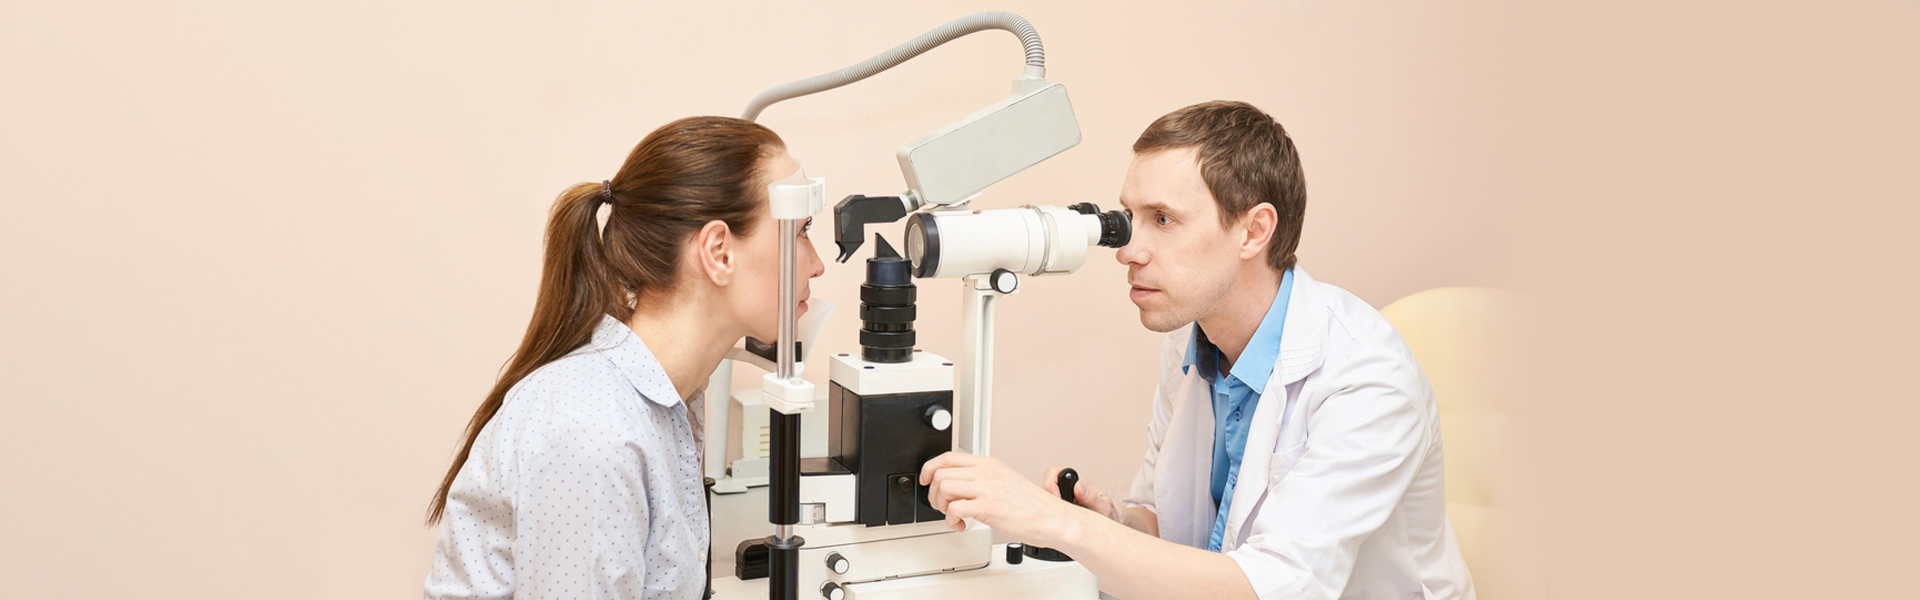 What Is an Optomap® Retinal Scan? Here’s All You Need to Know